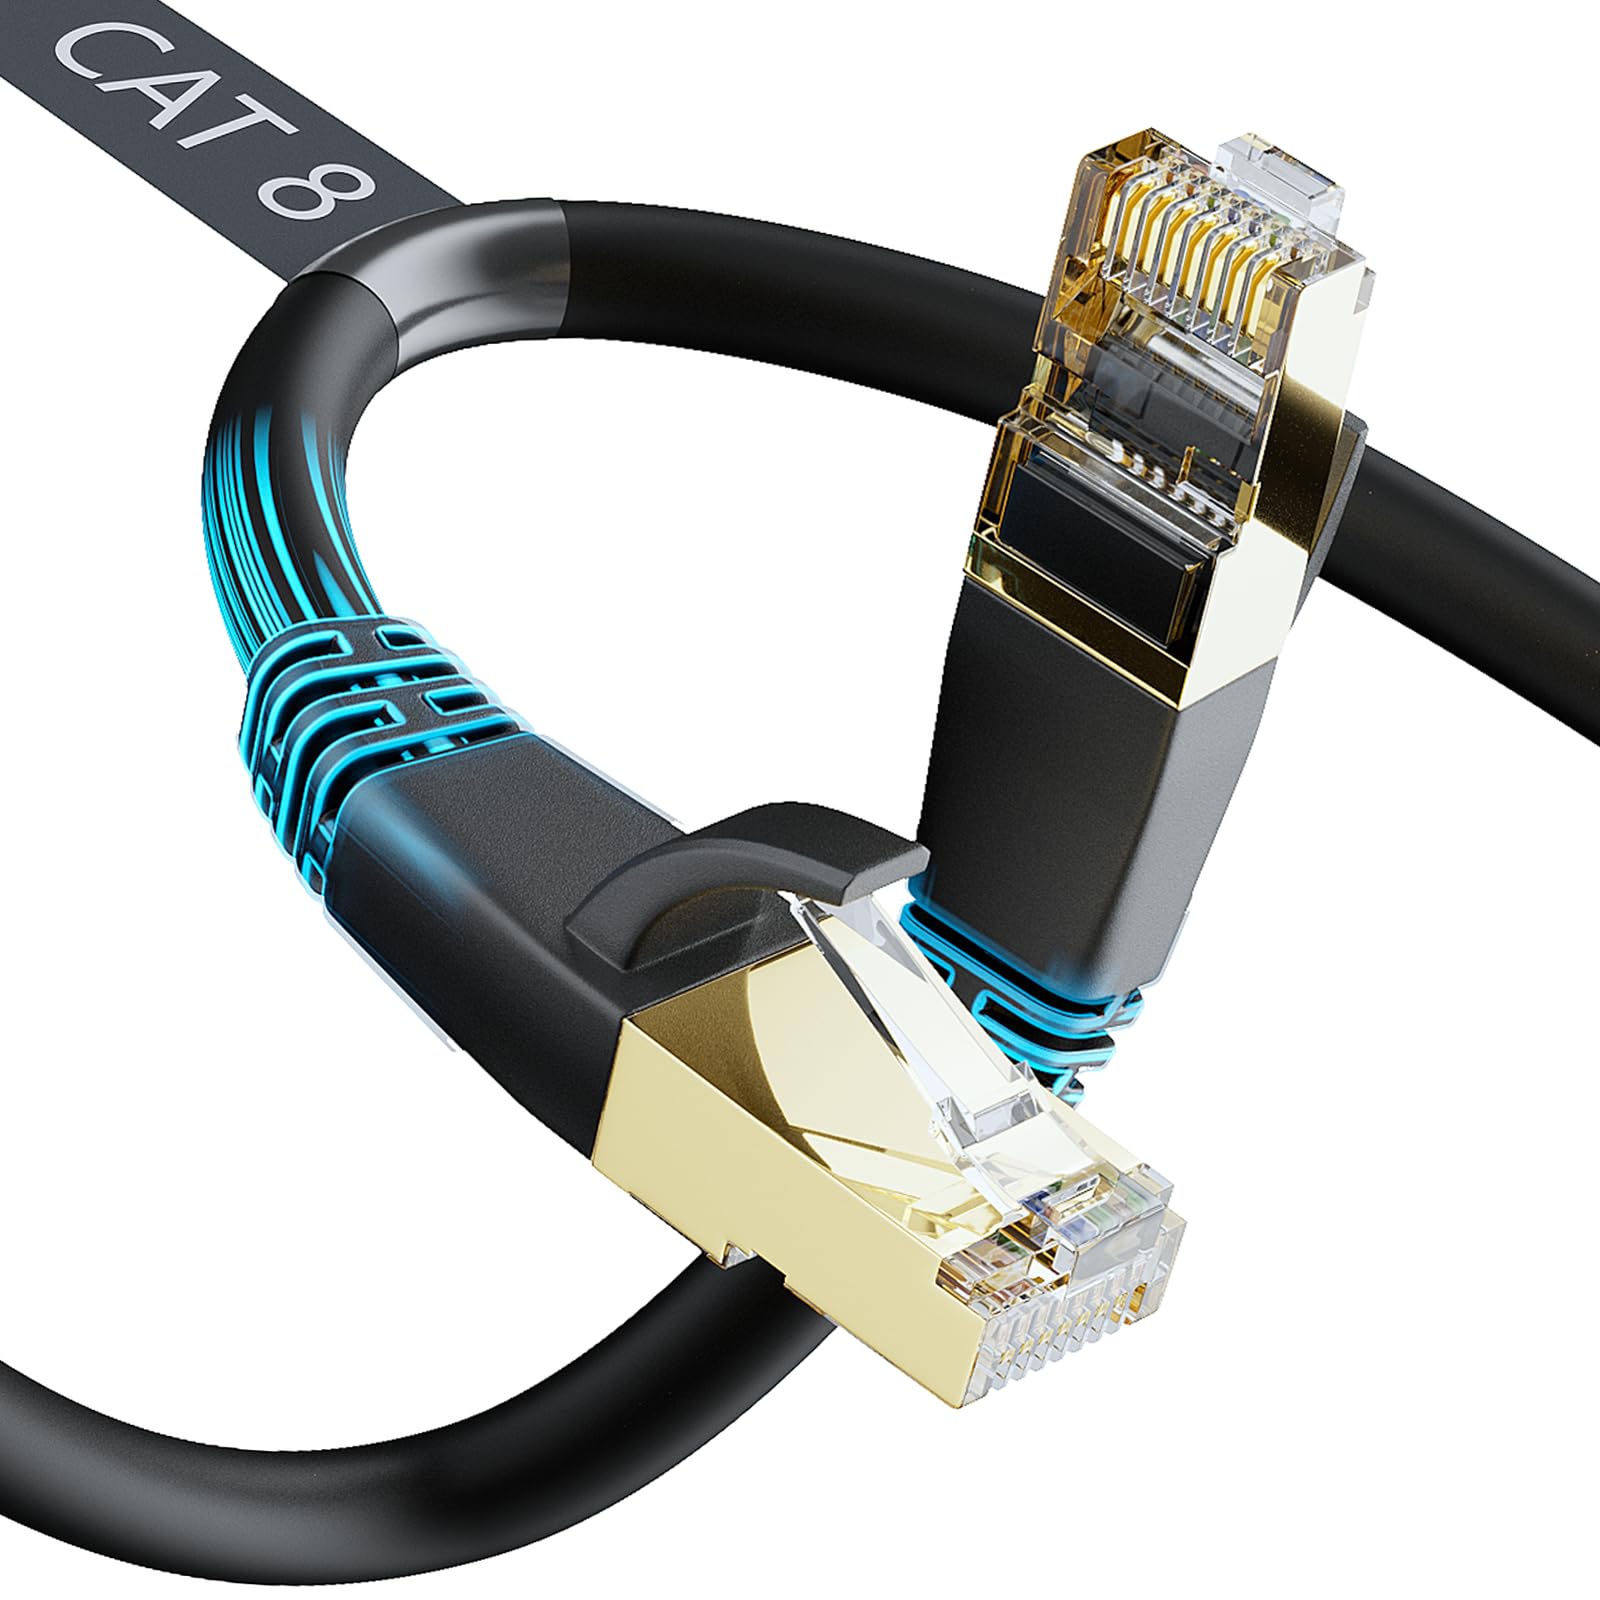 Connect your Xbox directly to the router using an Ethernet cable
This can provide a more stable connection and reduce packet loss